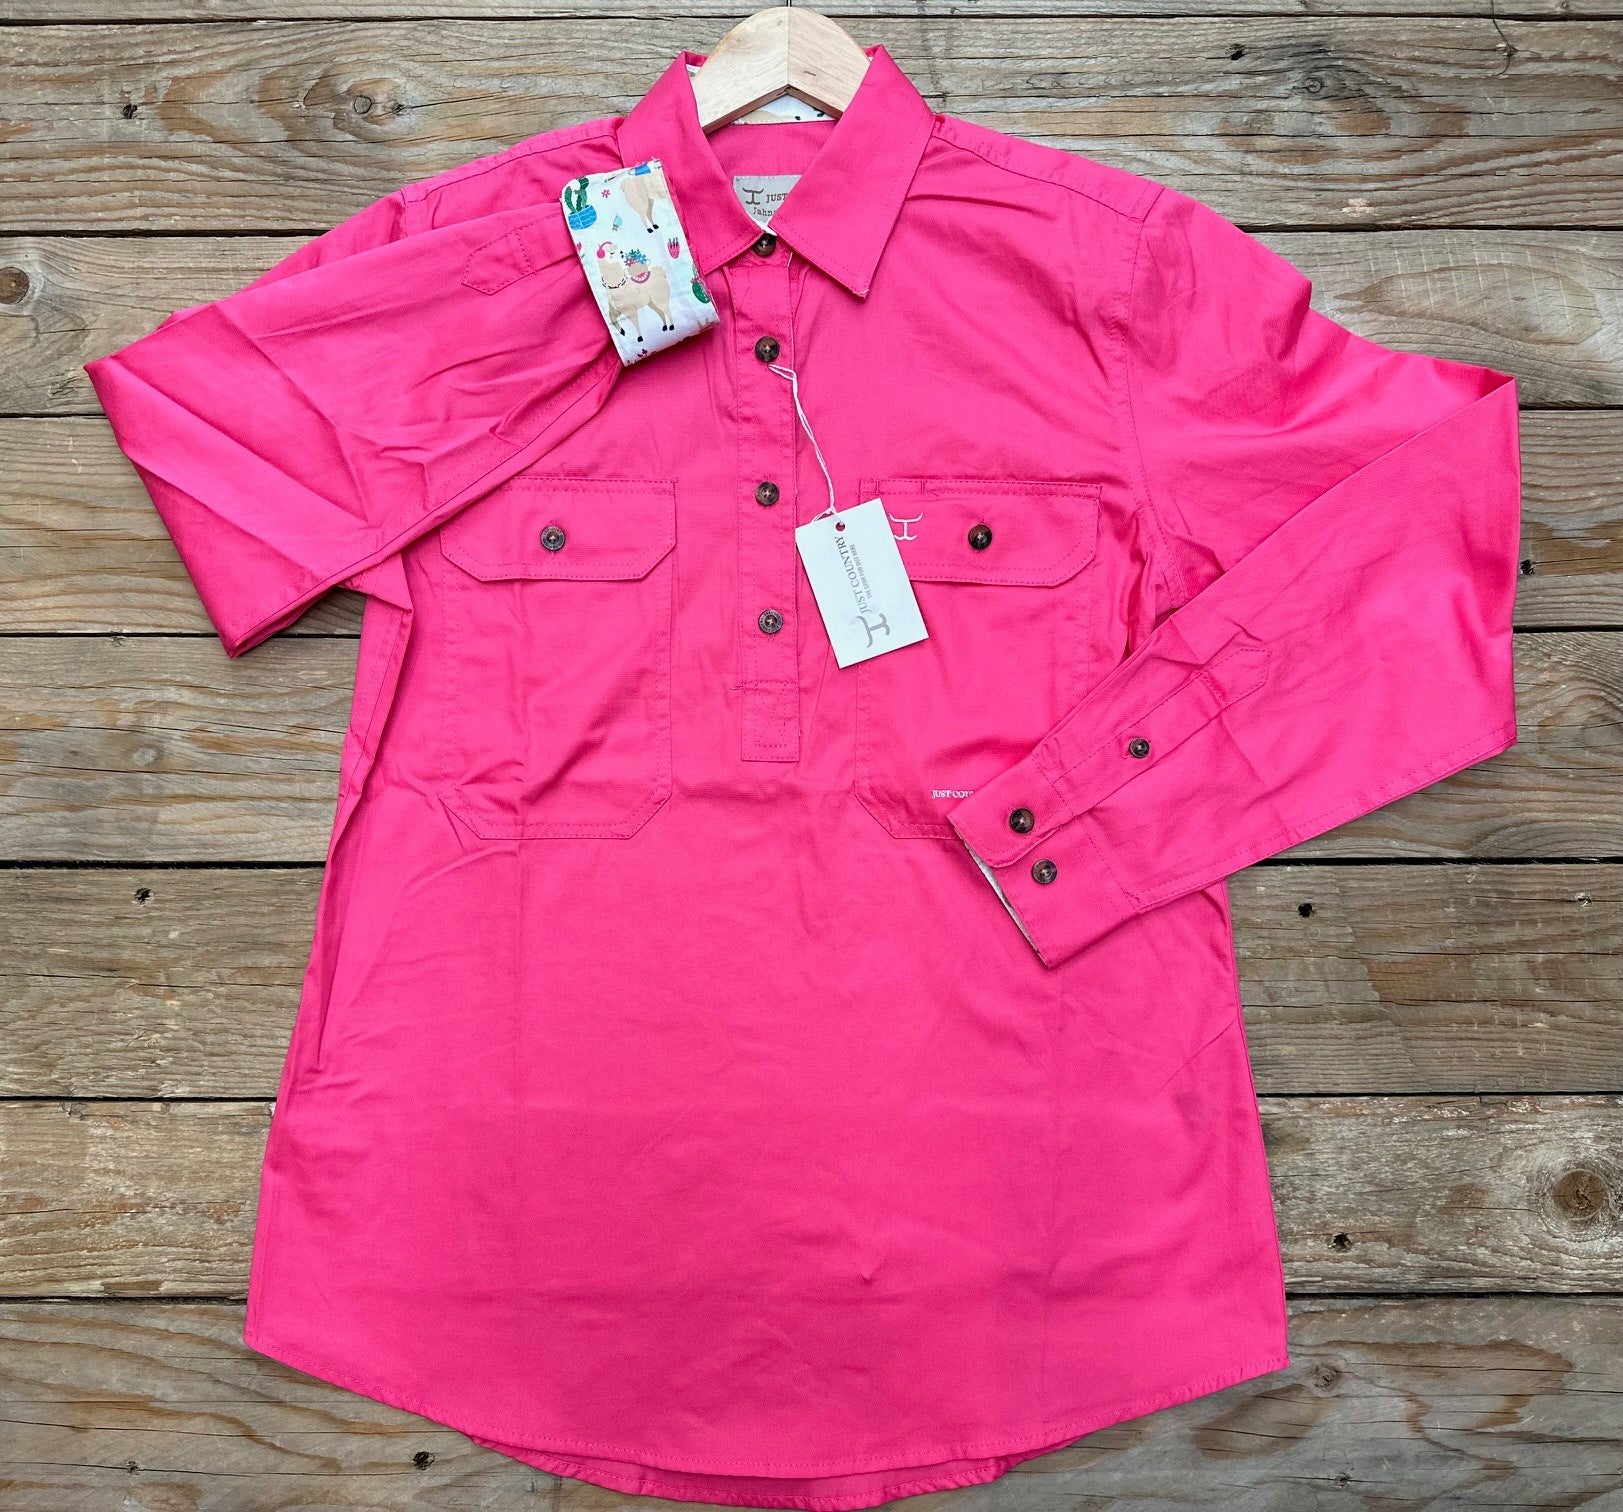 Womens Just Country Jahna Trim Half Button Solid Workshirt with Contrast - Hot Pink / White Llamas (6970978533453)